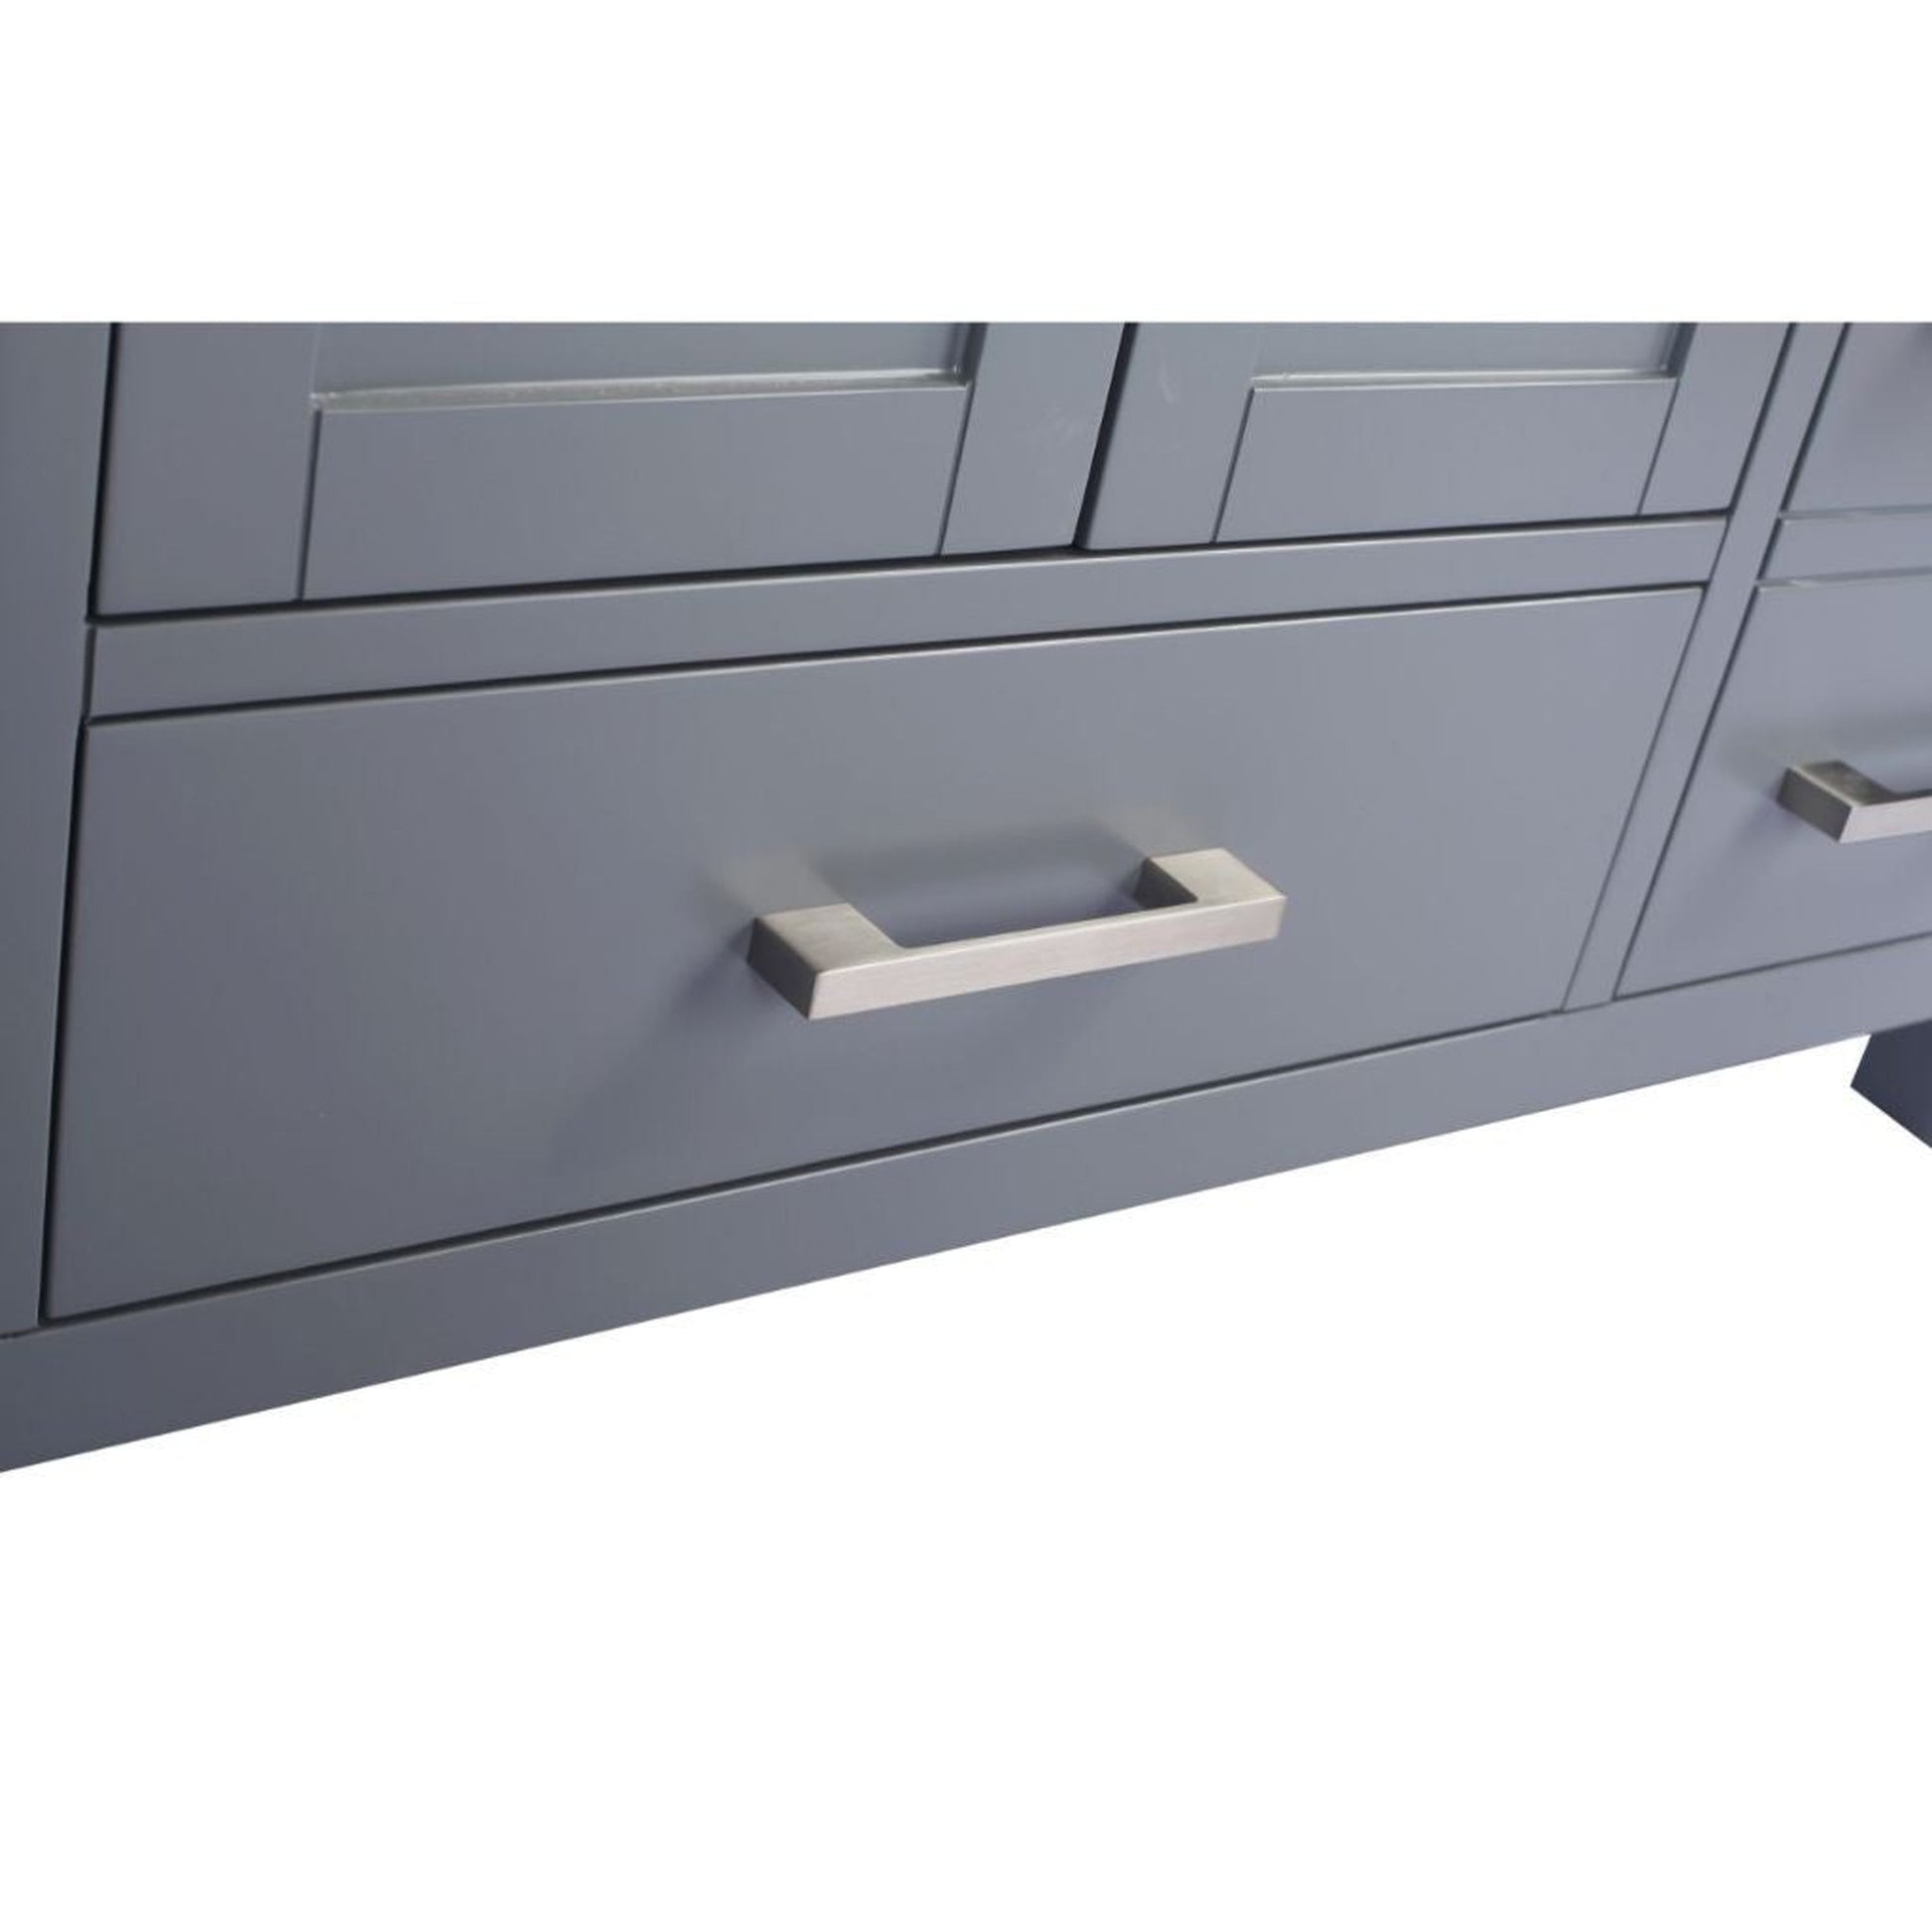 Laviva Wilson 48" Gray Vanity Base and Matte Black Viva Stone Solid Surface Countertop With Integrated Sink